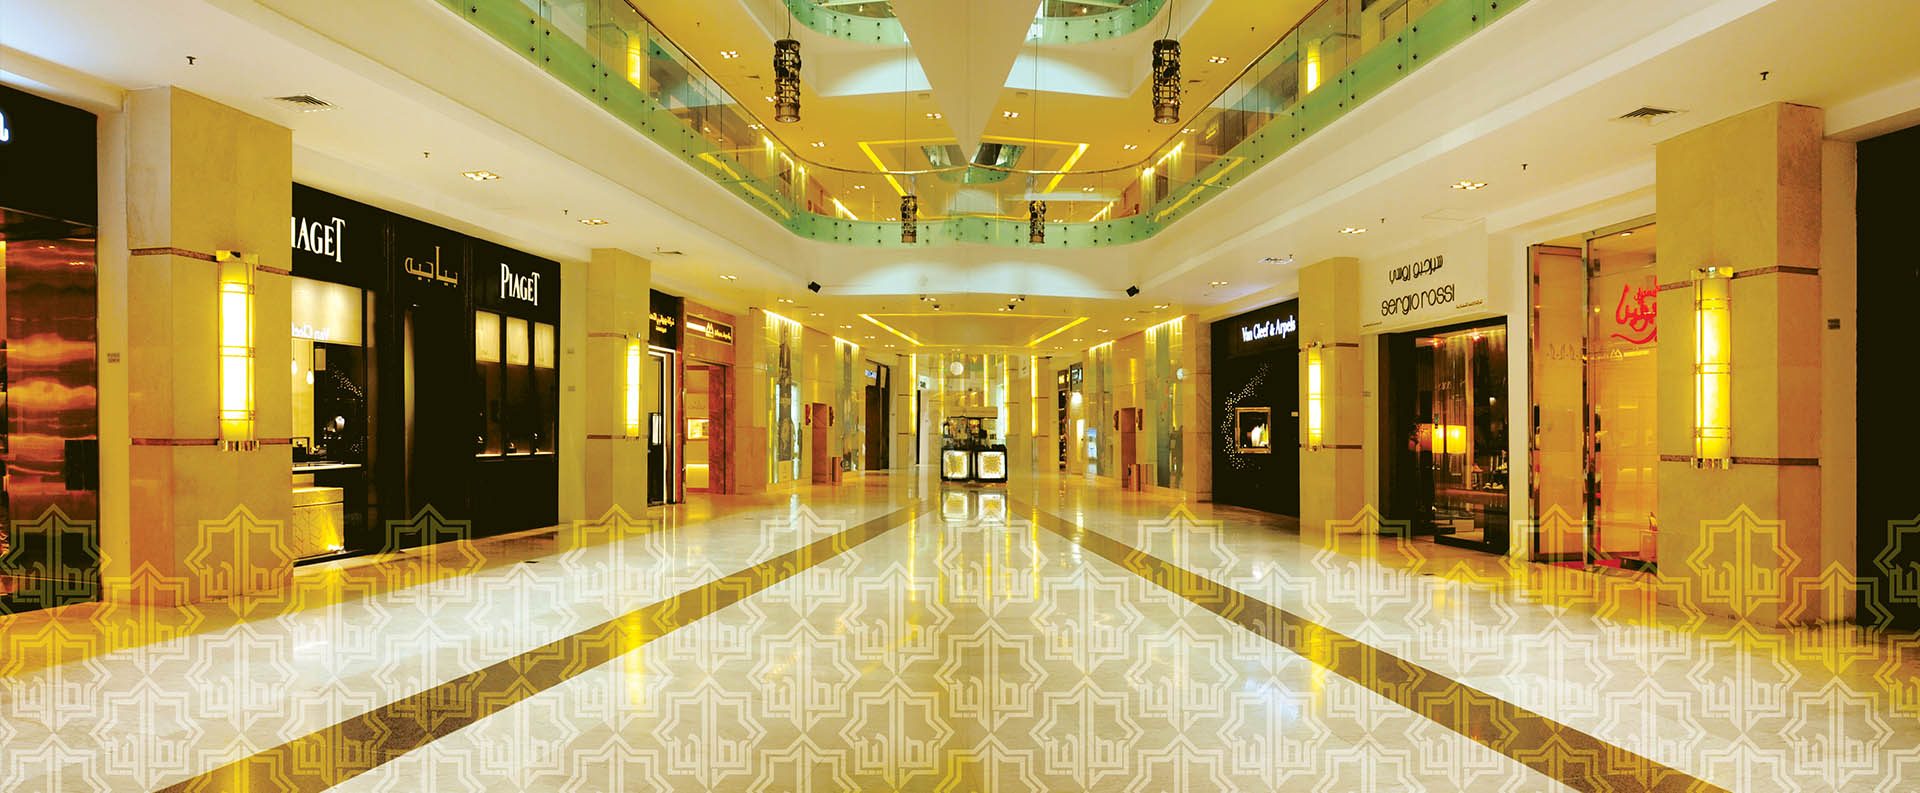 SALHIA COMPLEX KUWAIT CITY THE LUXURIOUS SHOPPING MALL IN KUWAIT